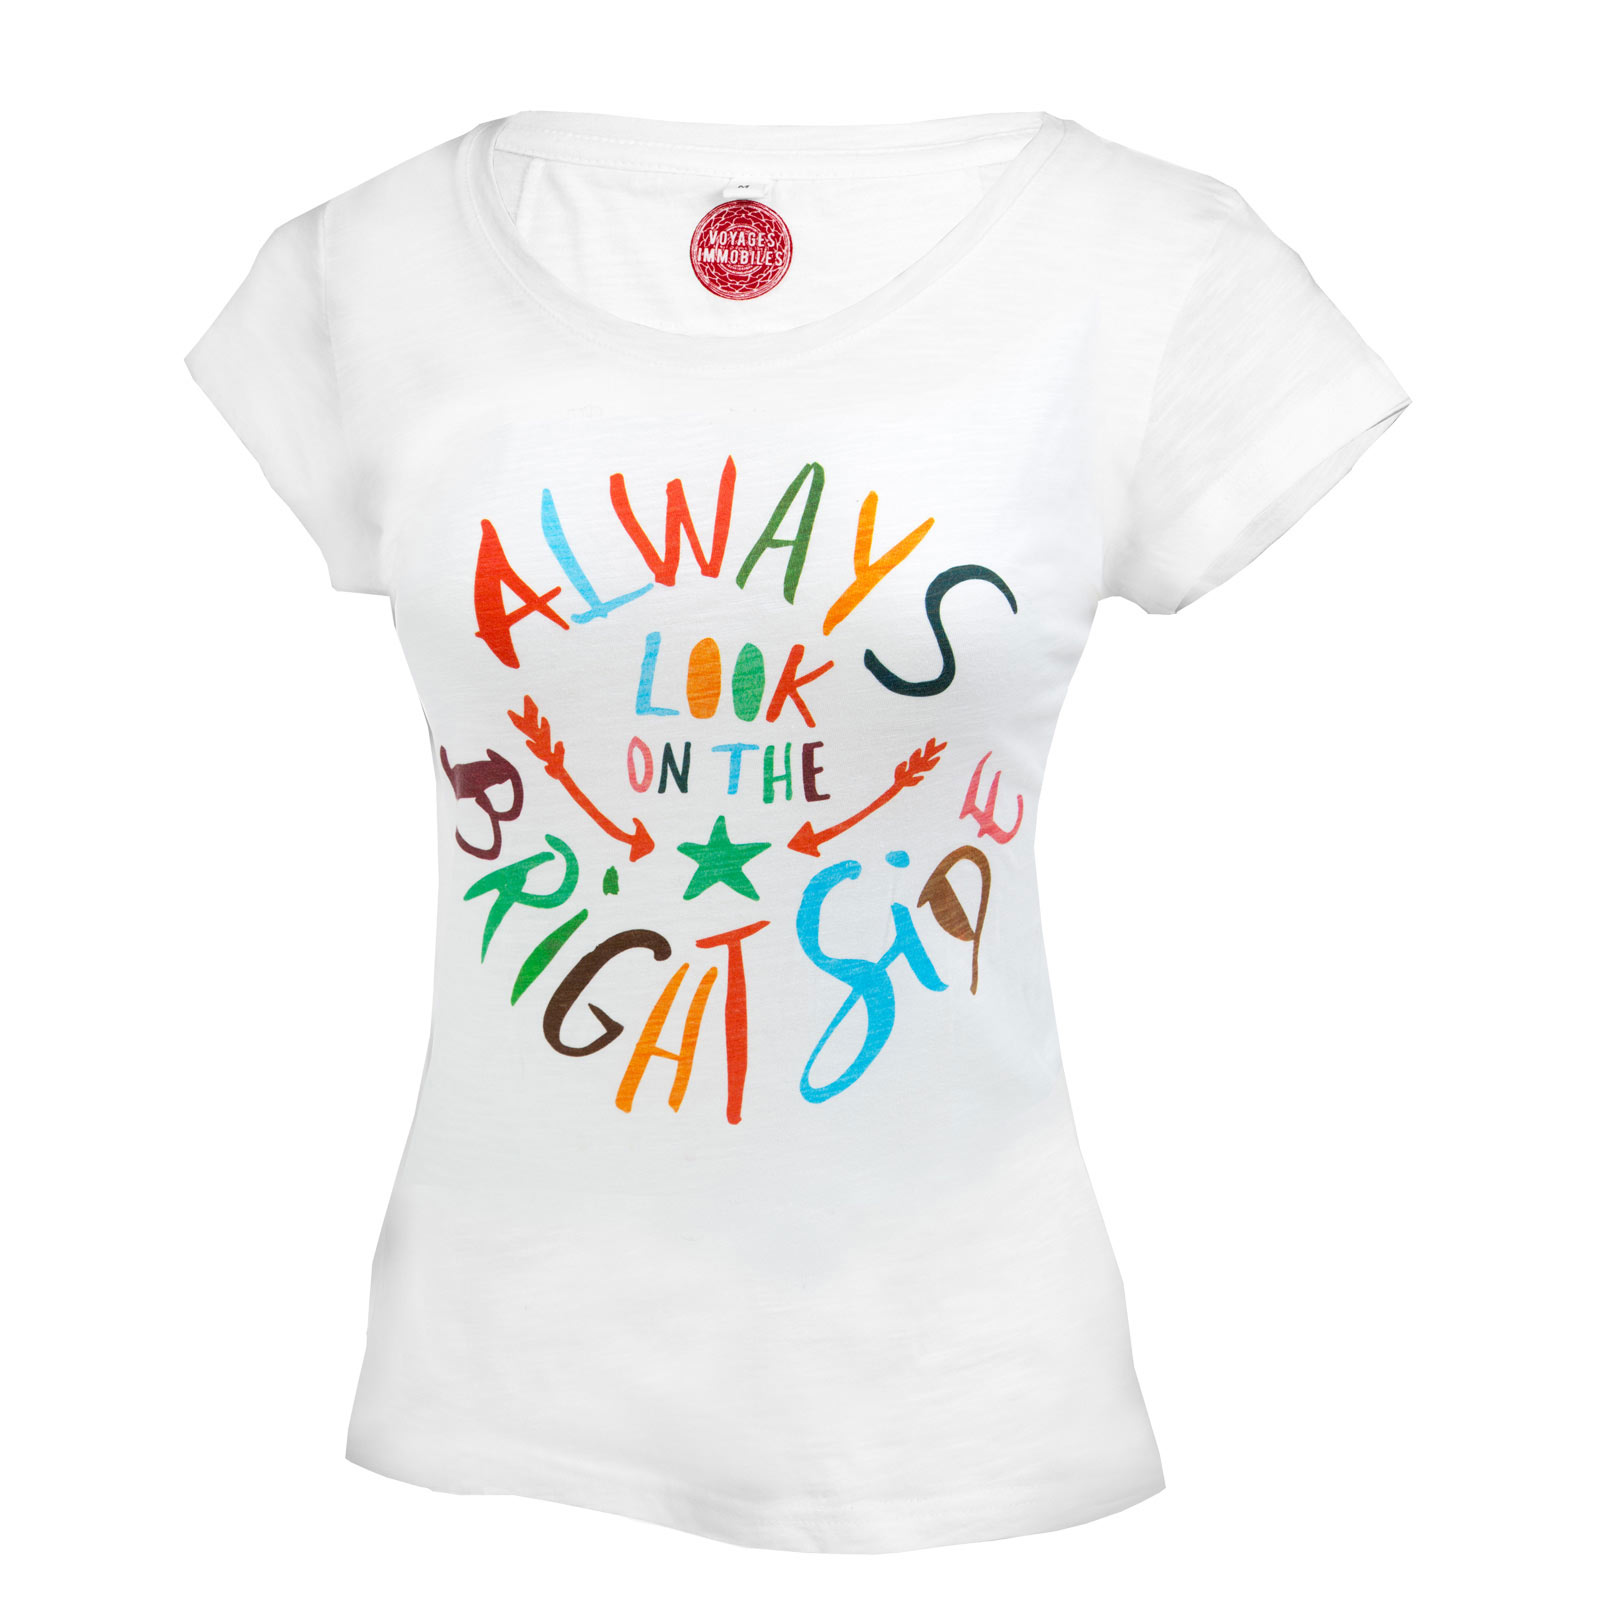 T-Shirt "Always look on the bright side" S